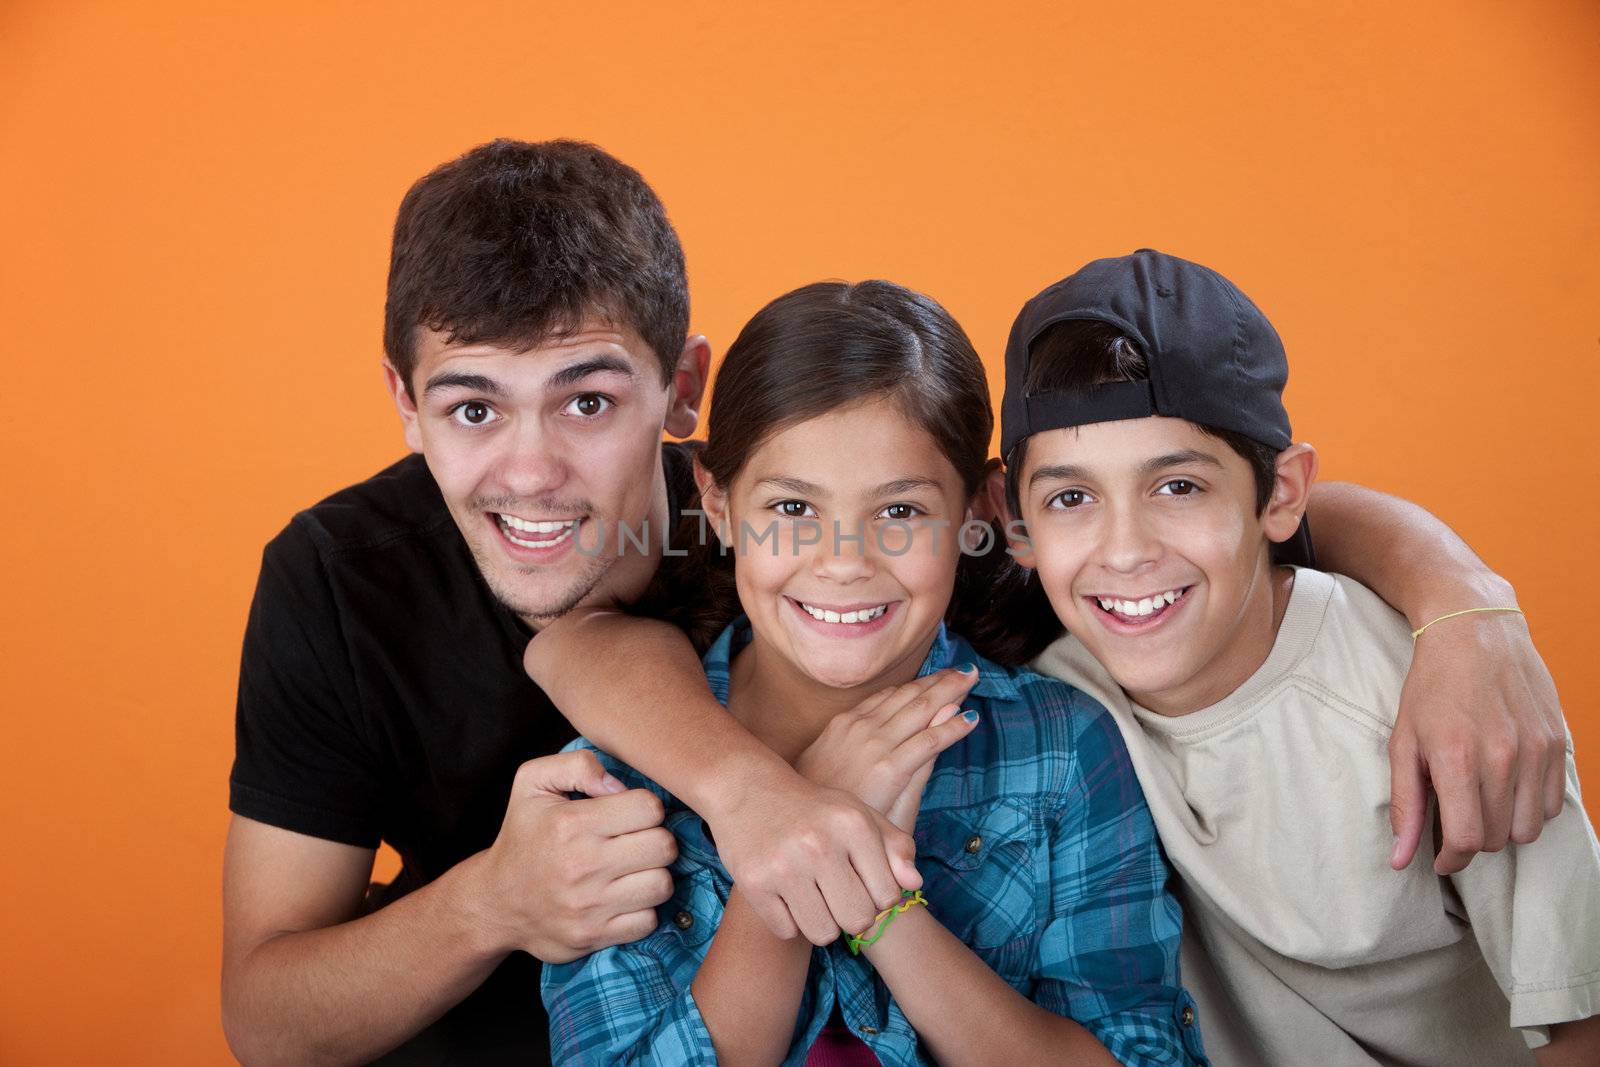 Big brother with two siblings smiling on orange background